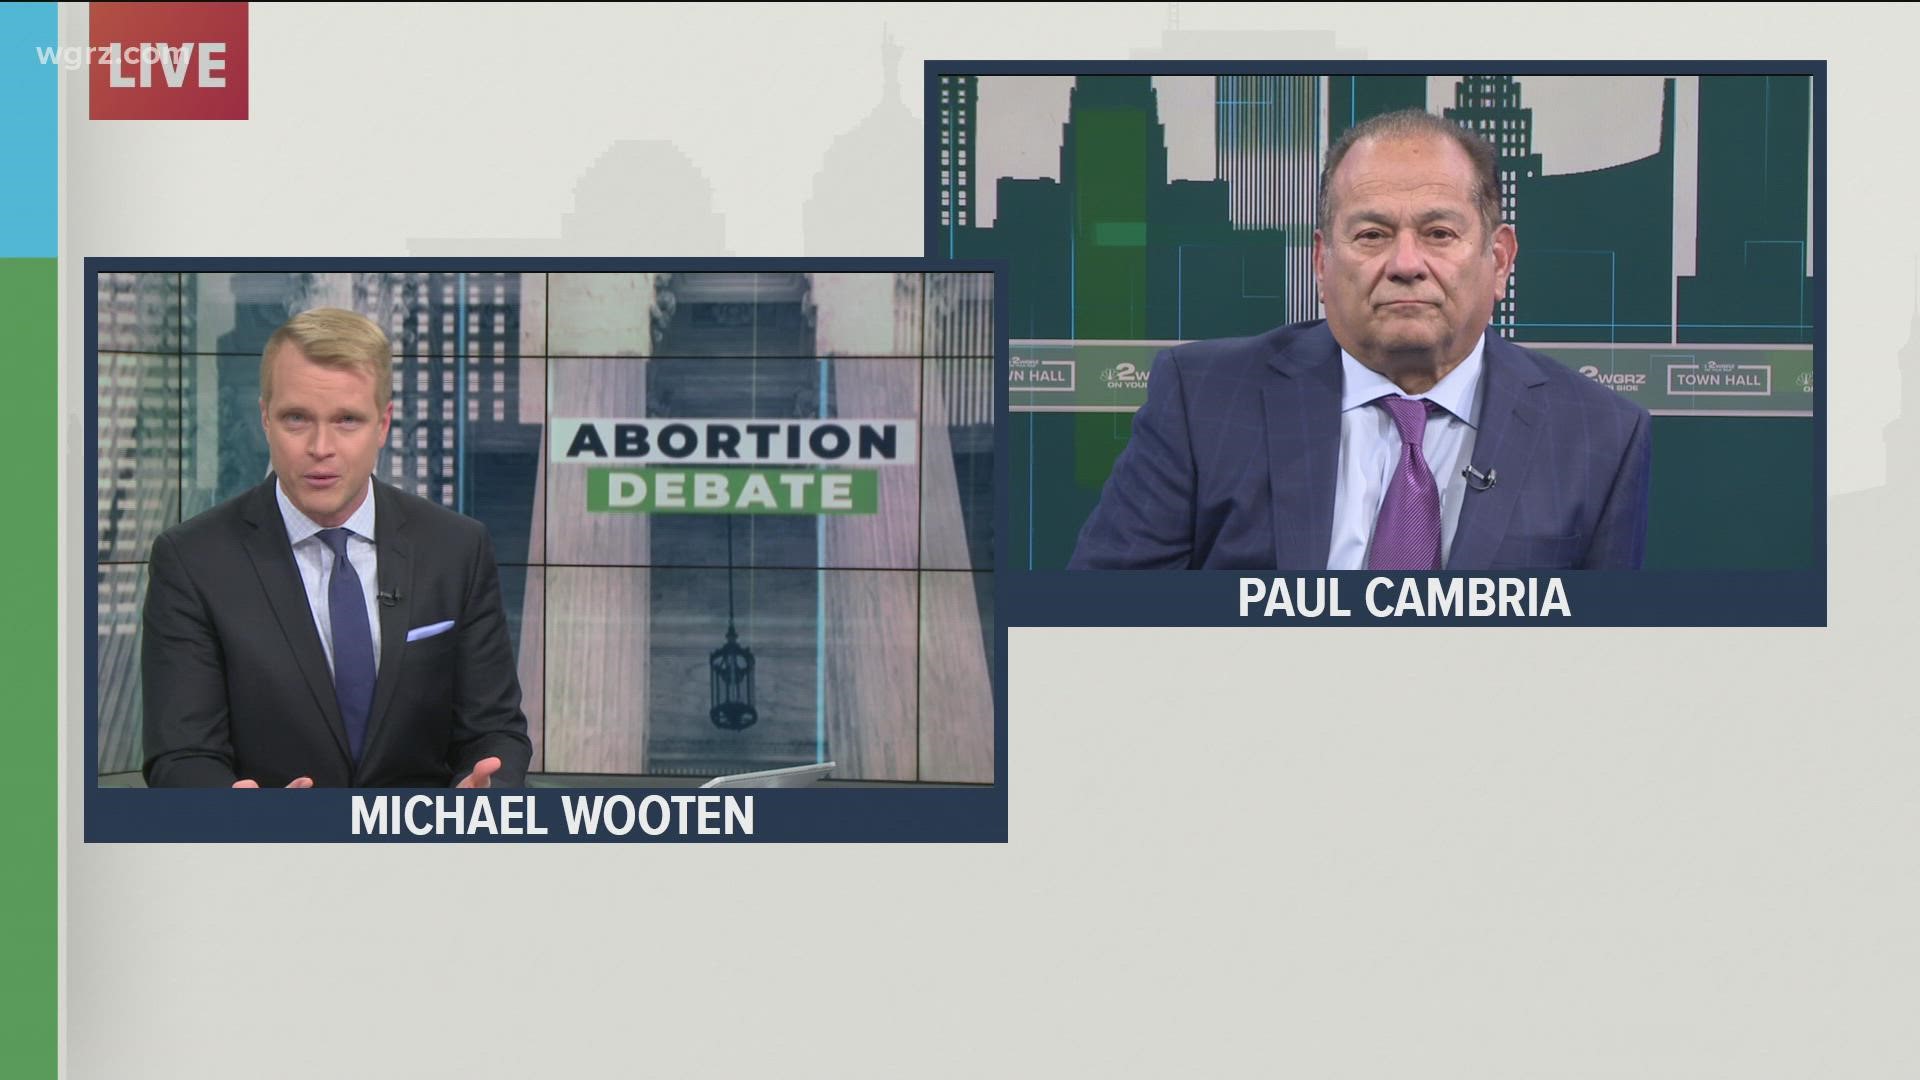 Answering your questions about leaked Supreme Court abortion opinion, Paul Cambria Joins our Town Hall to discuss it.